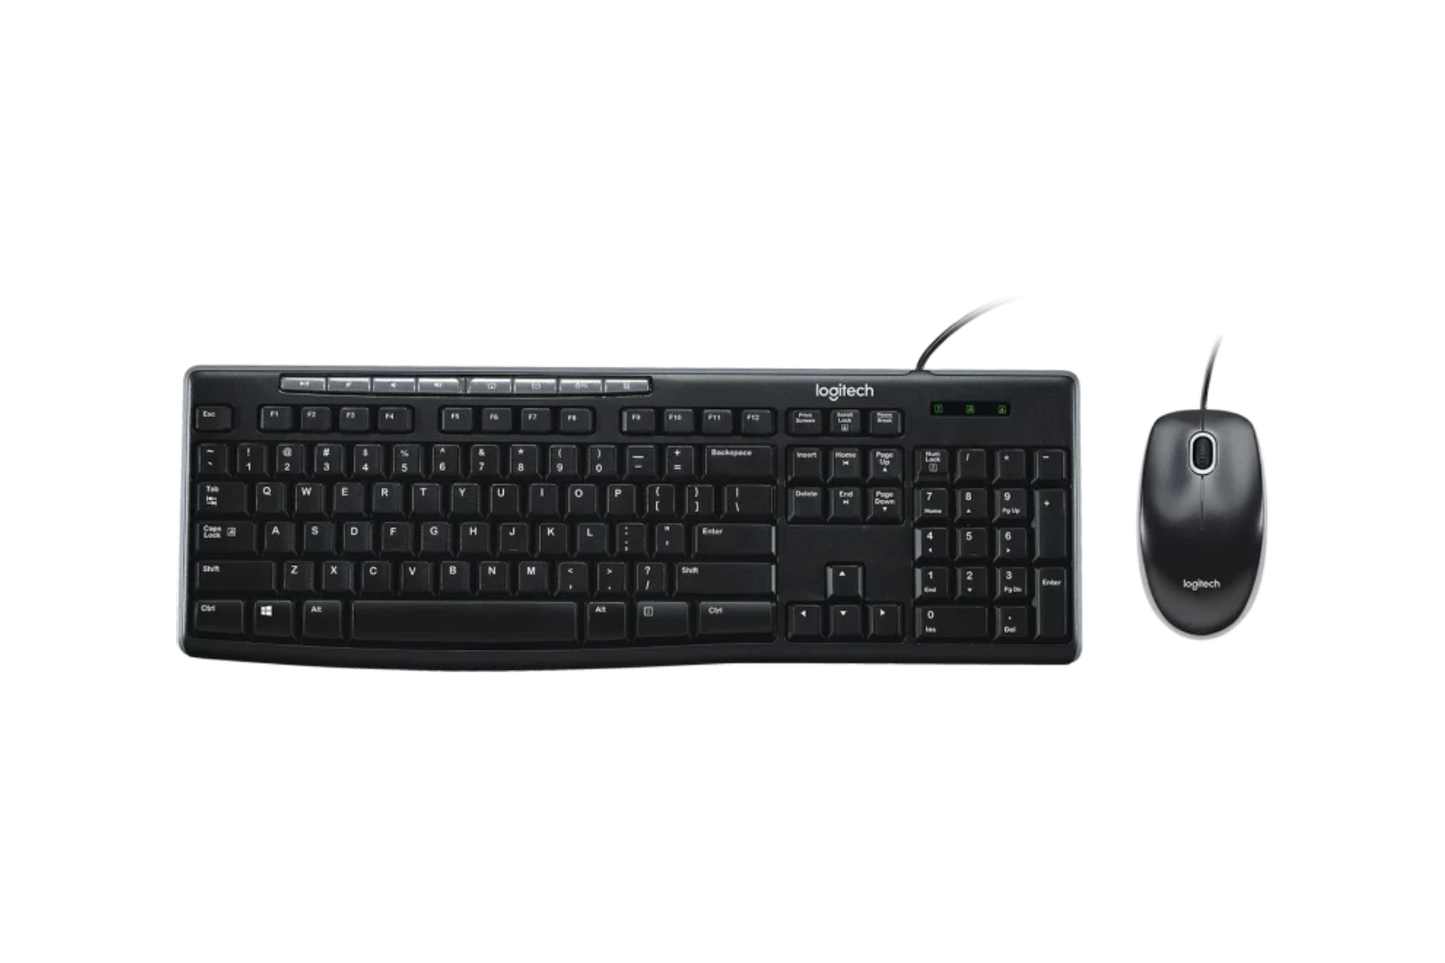 Logitech MK200 Media Wired Keyboard and Mouse Combo (Black)